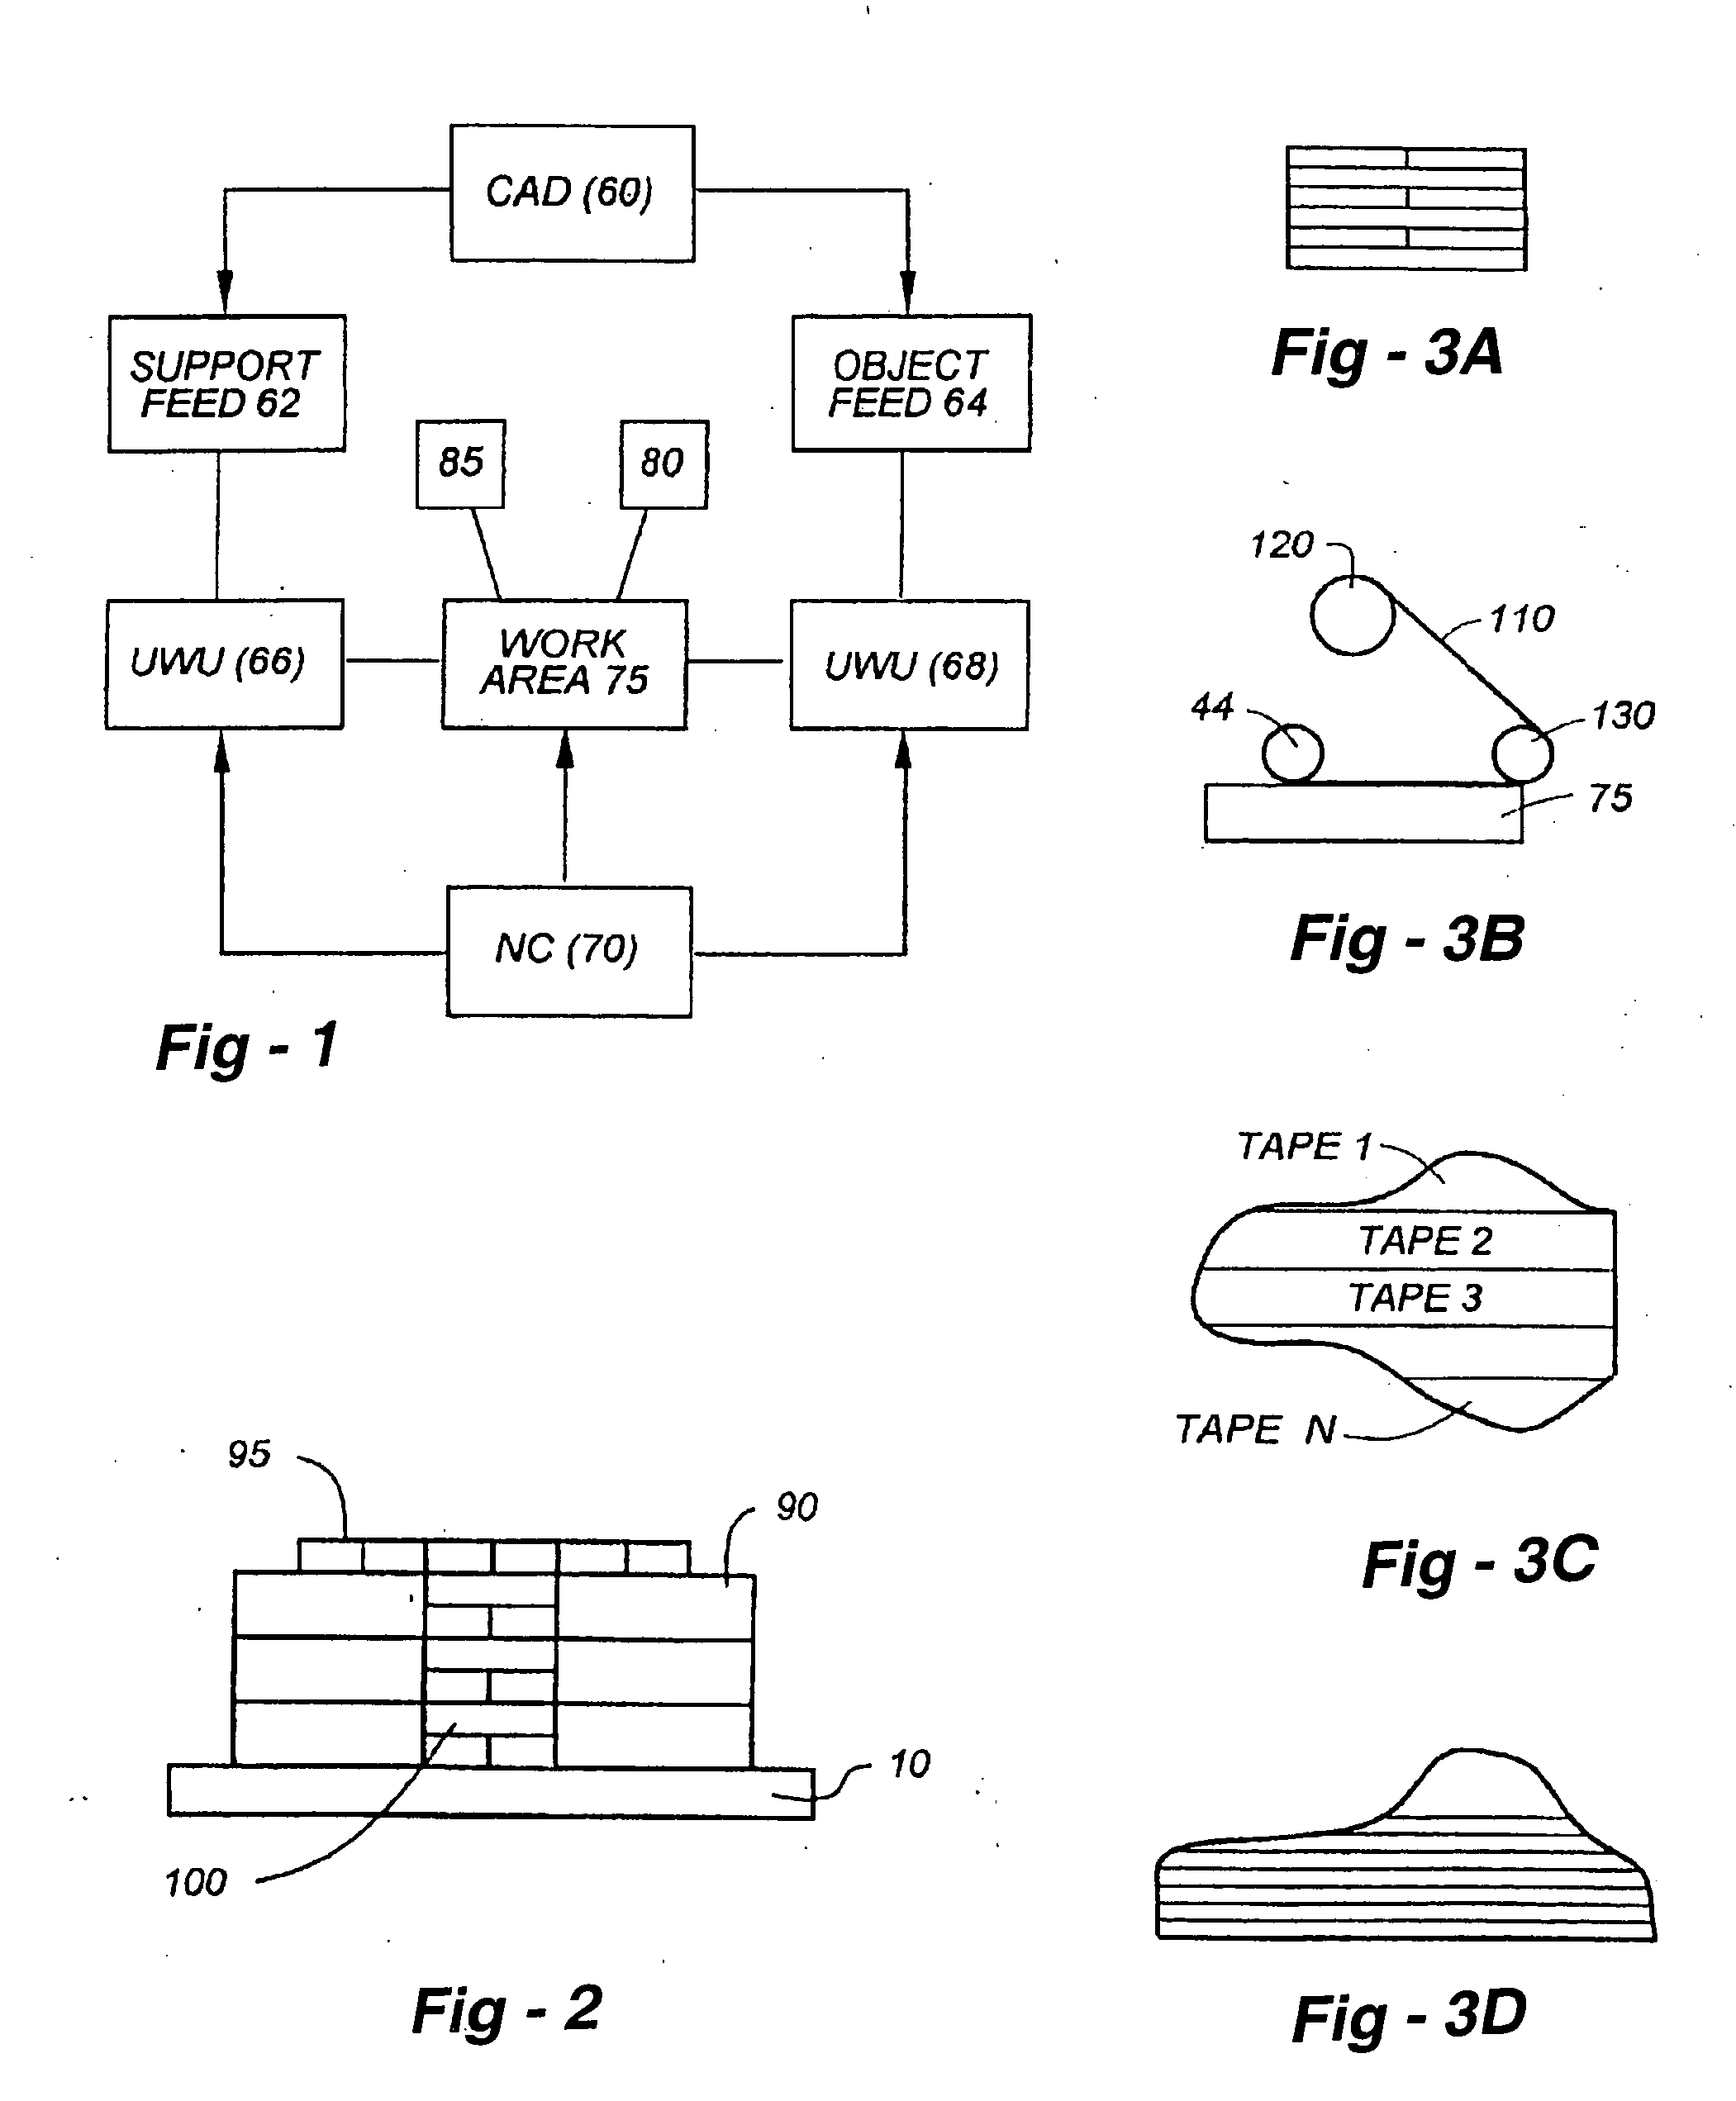 Closed-loop control of power used in ultrasonic consolidation